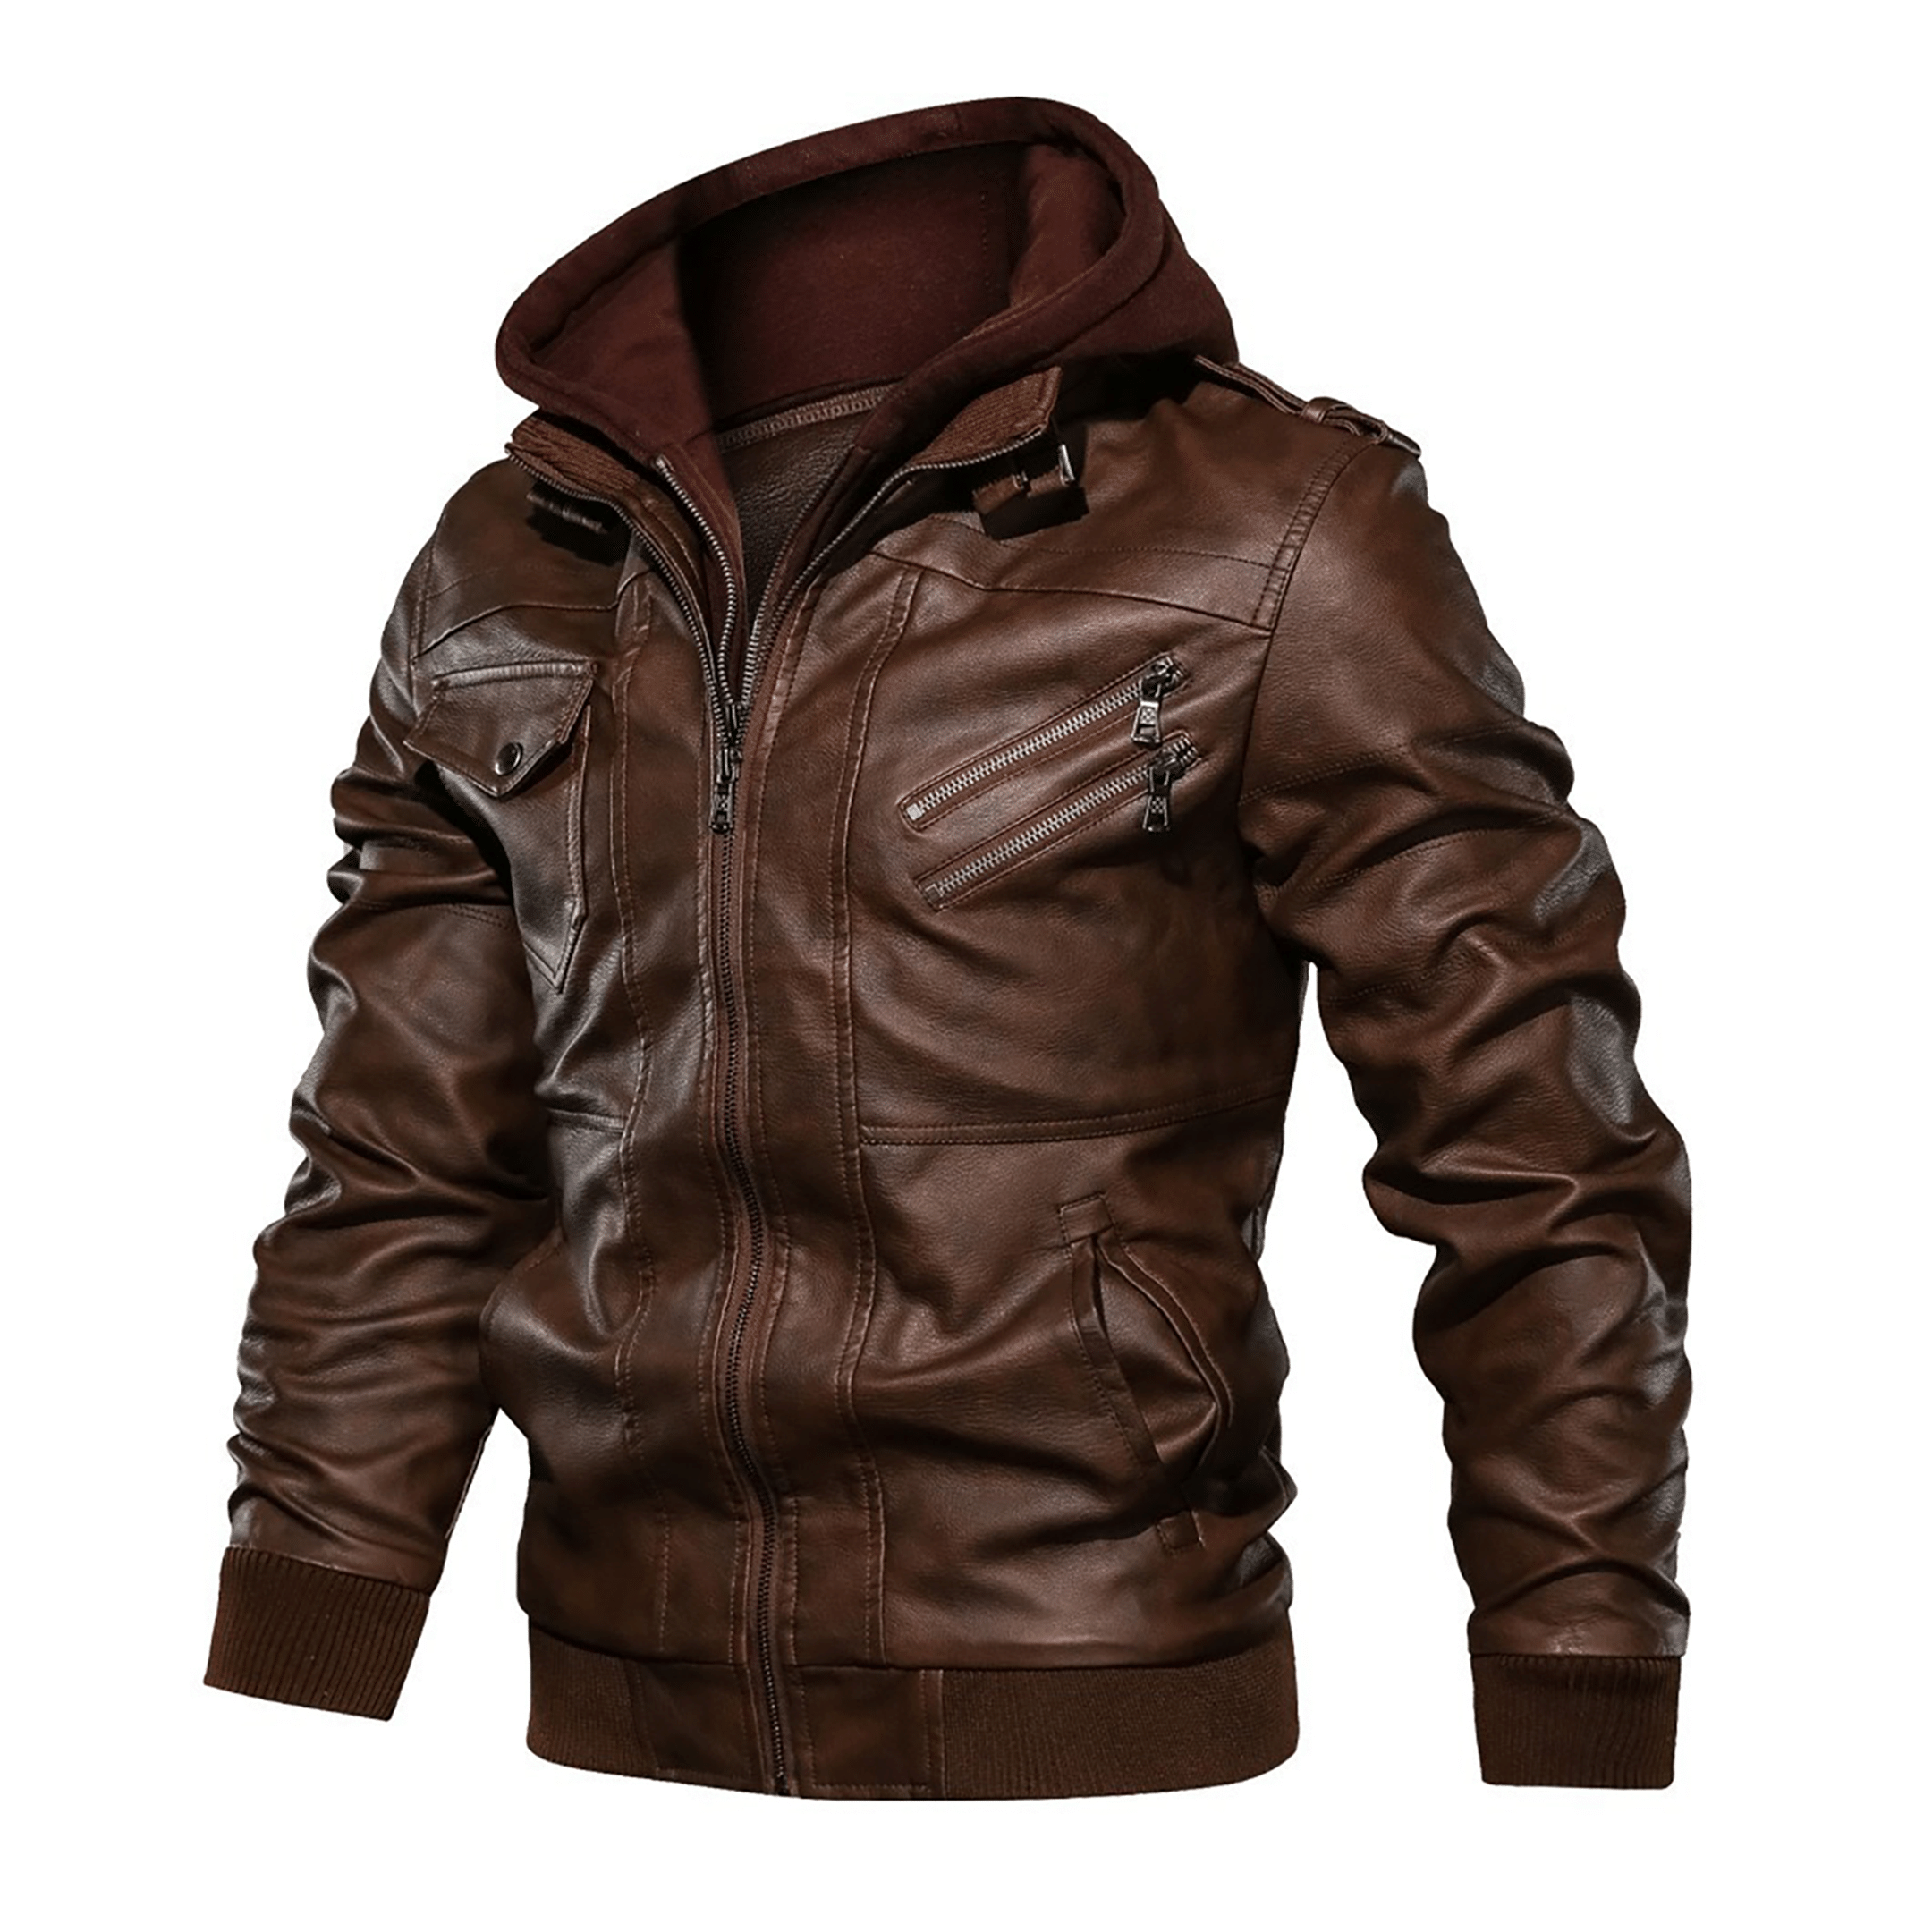 Top leather jackets and latest products 385